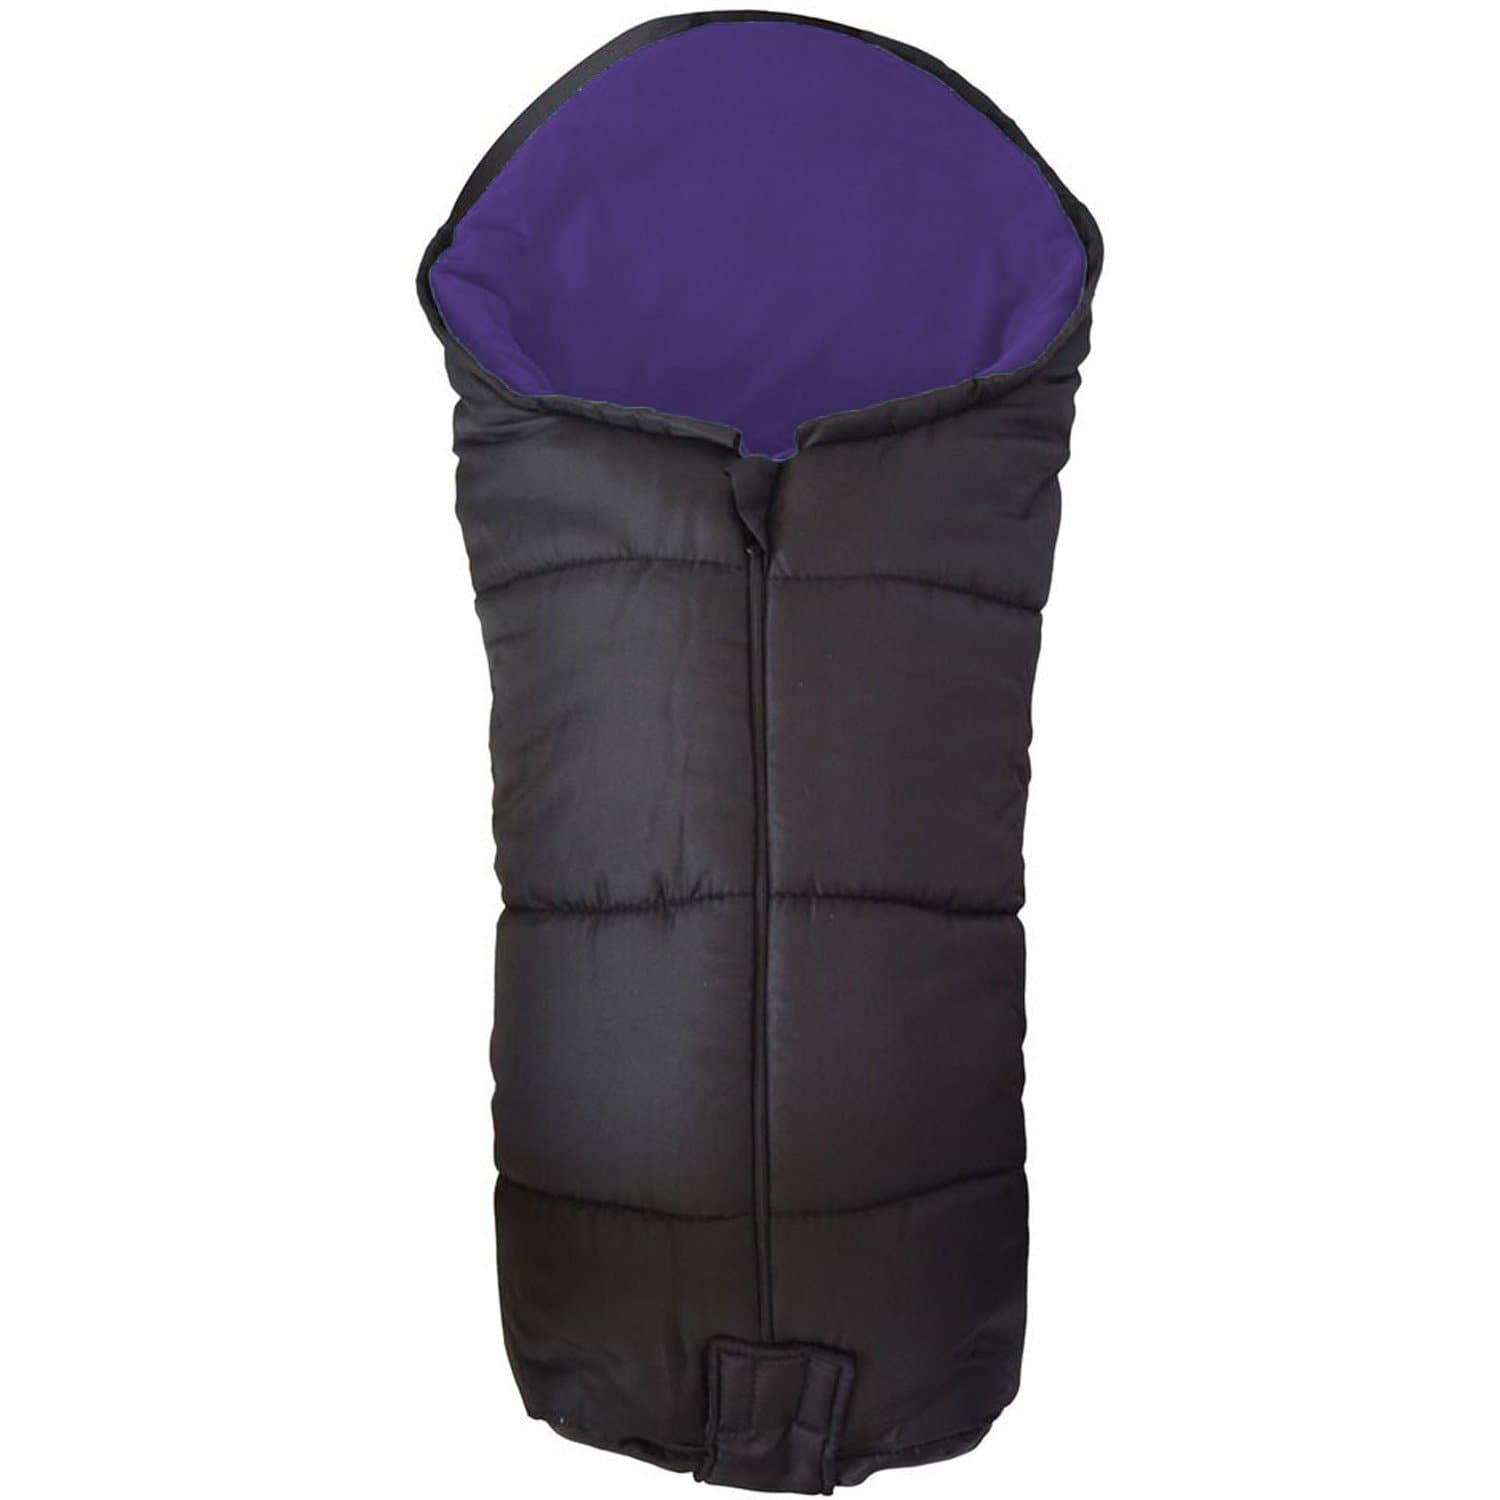 Universal Deluxe Pushchair Footmuff / Cosy Toes - Fits All Pushchairs / Prams And Buggies Purple Fits All Models 